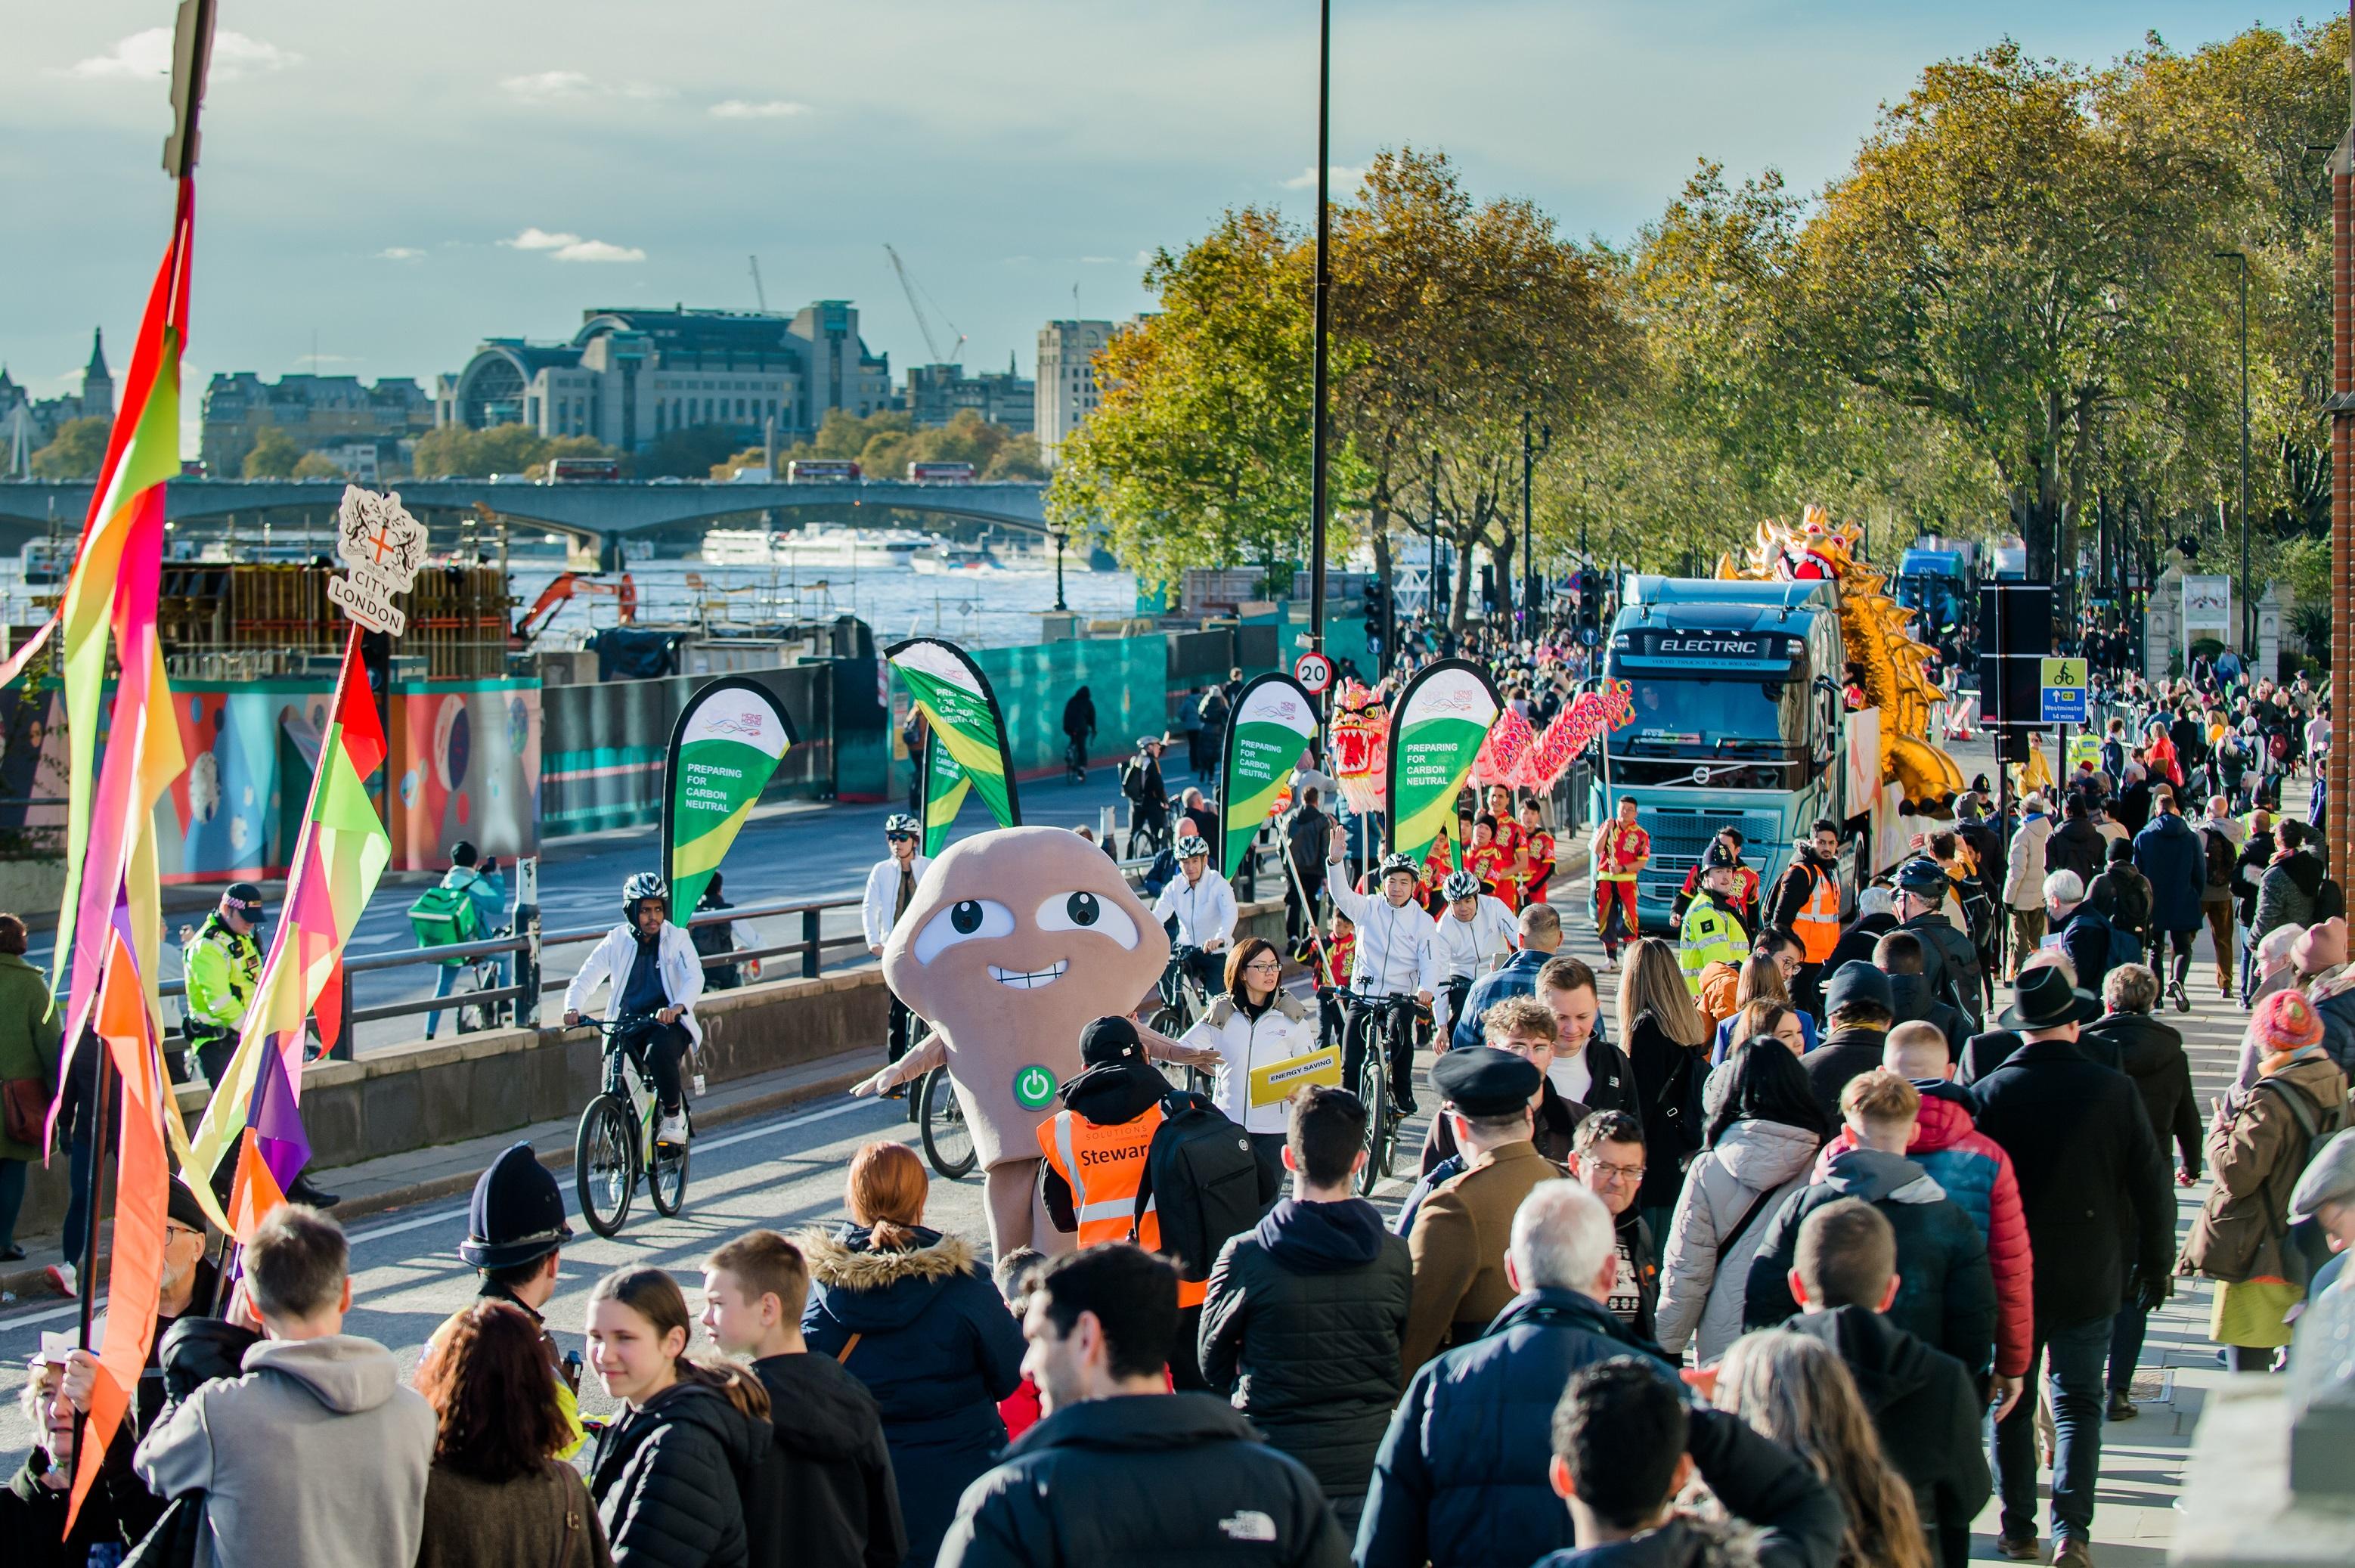 The Hong Kong Economic and Trade Office, London took part in the City of London Lord Mayor's Show on November 11 (London time) with a float highlighting Hong Kong's plan to achieve carbon neutrality before 2050. Photo show the float passing the Victoria Embankment in London and the mascot Hanson as well as the fleet of electric bikes interacting with the crowd.